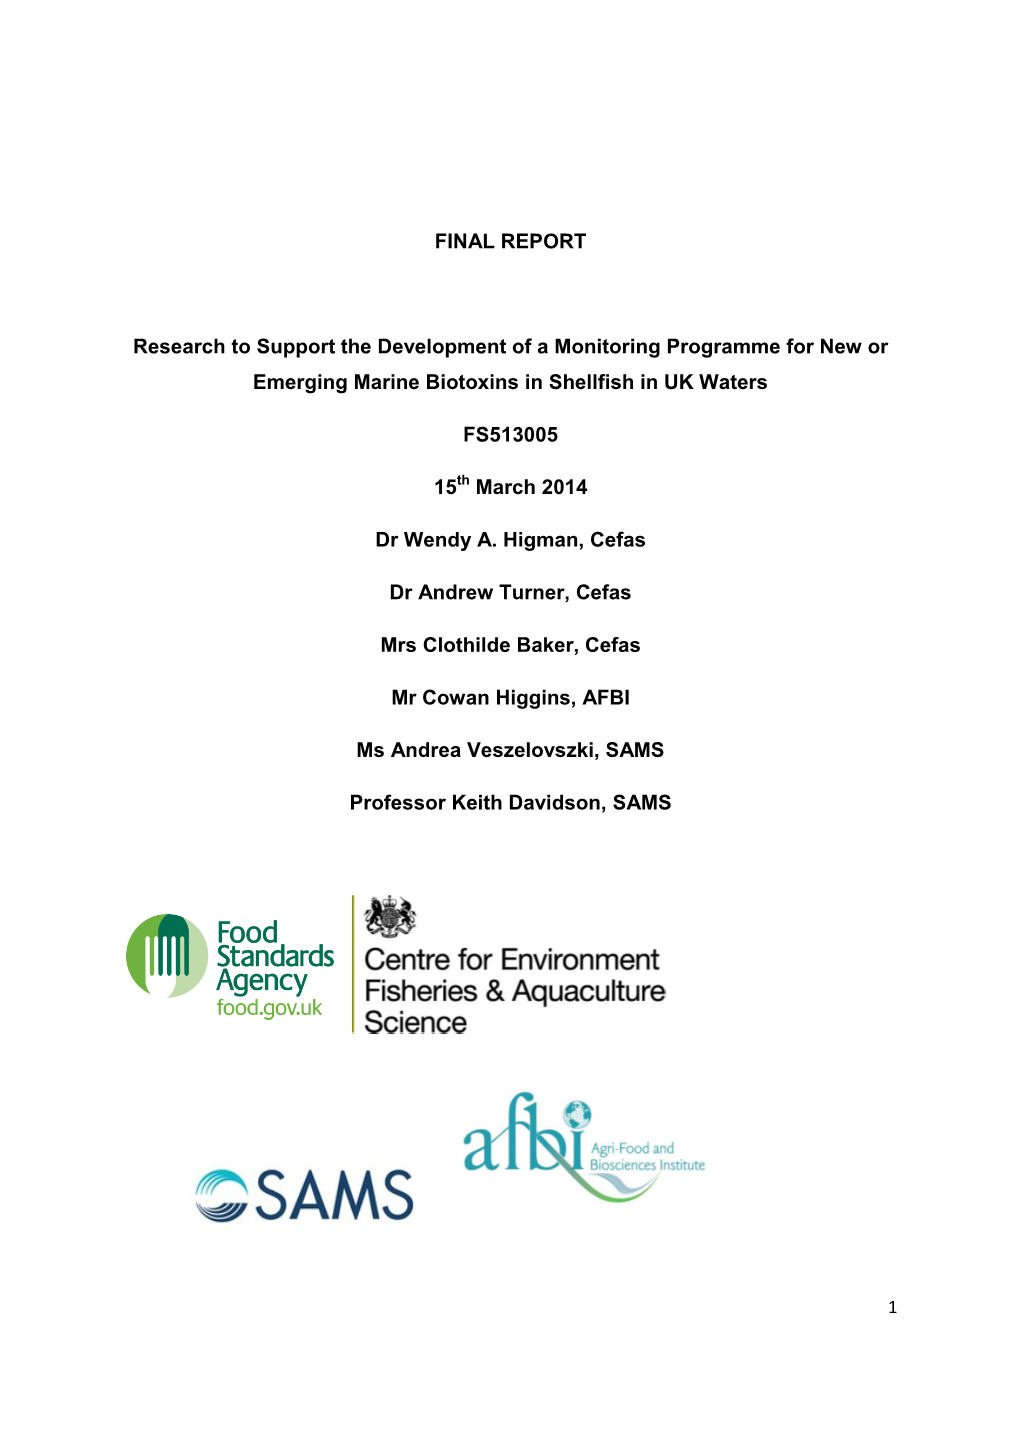 FINAL REPORT Research to Support the Development of a Monitoring